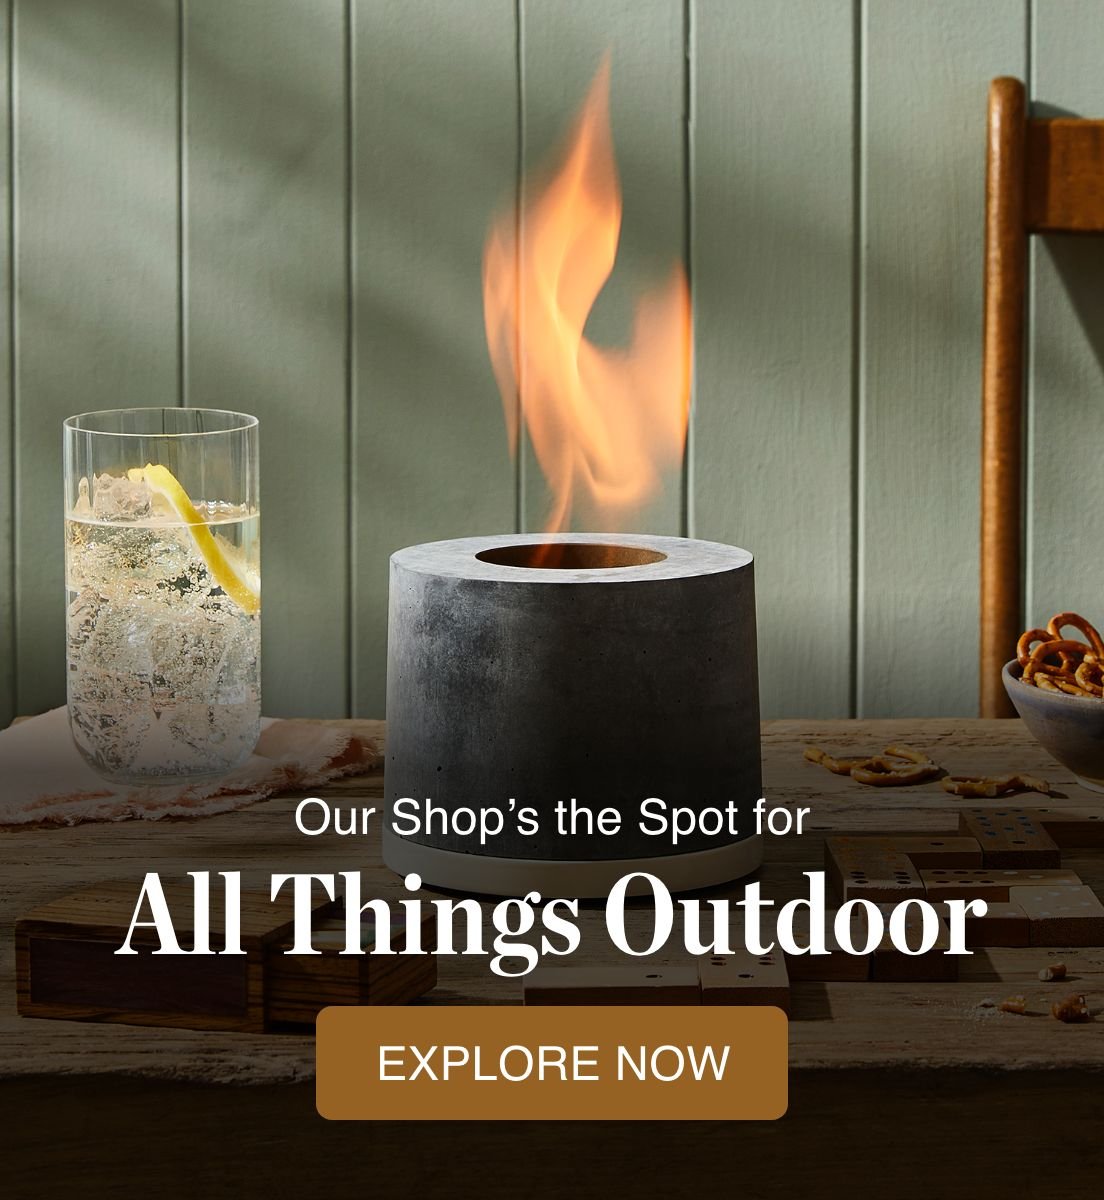 All Things Outdoor